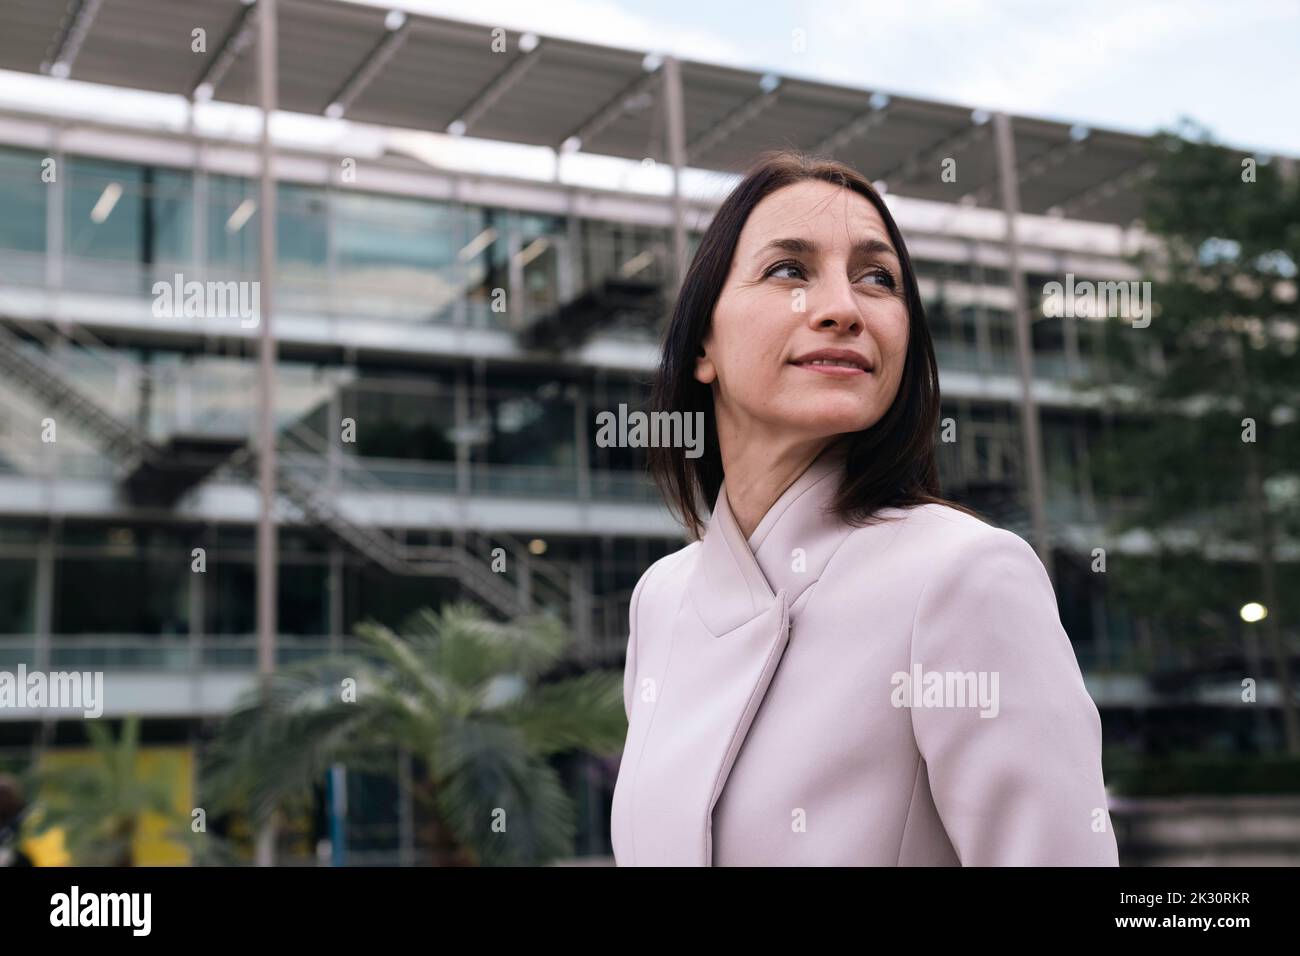 Mature businesswoman outside office building exterior Stock Photo